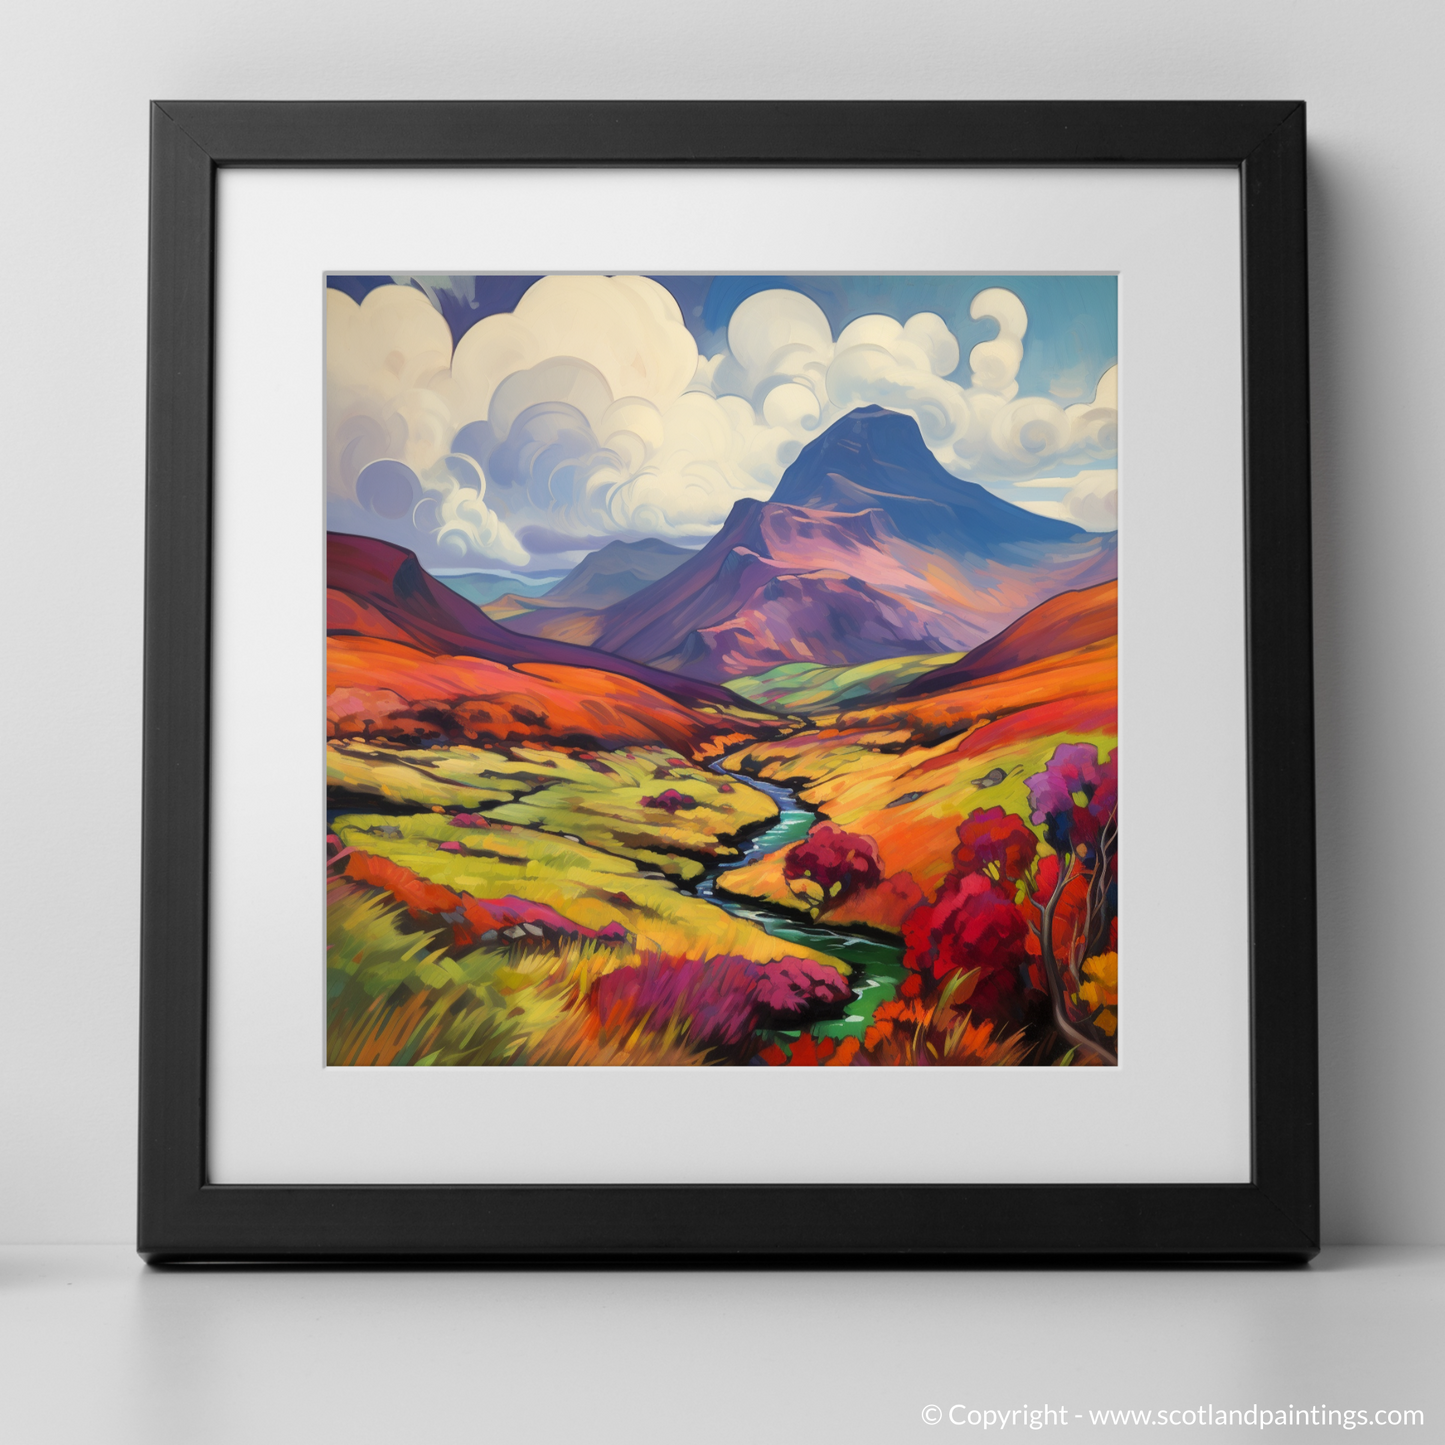 Majestic Meall nan Tarmachan: A Fauvist Ode to Scottish Wilds